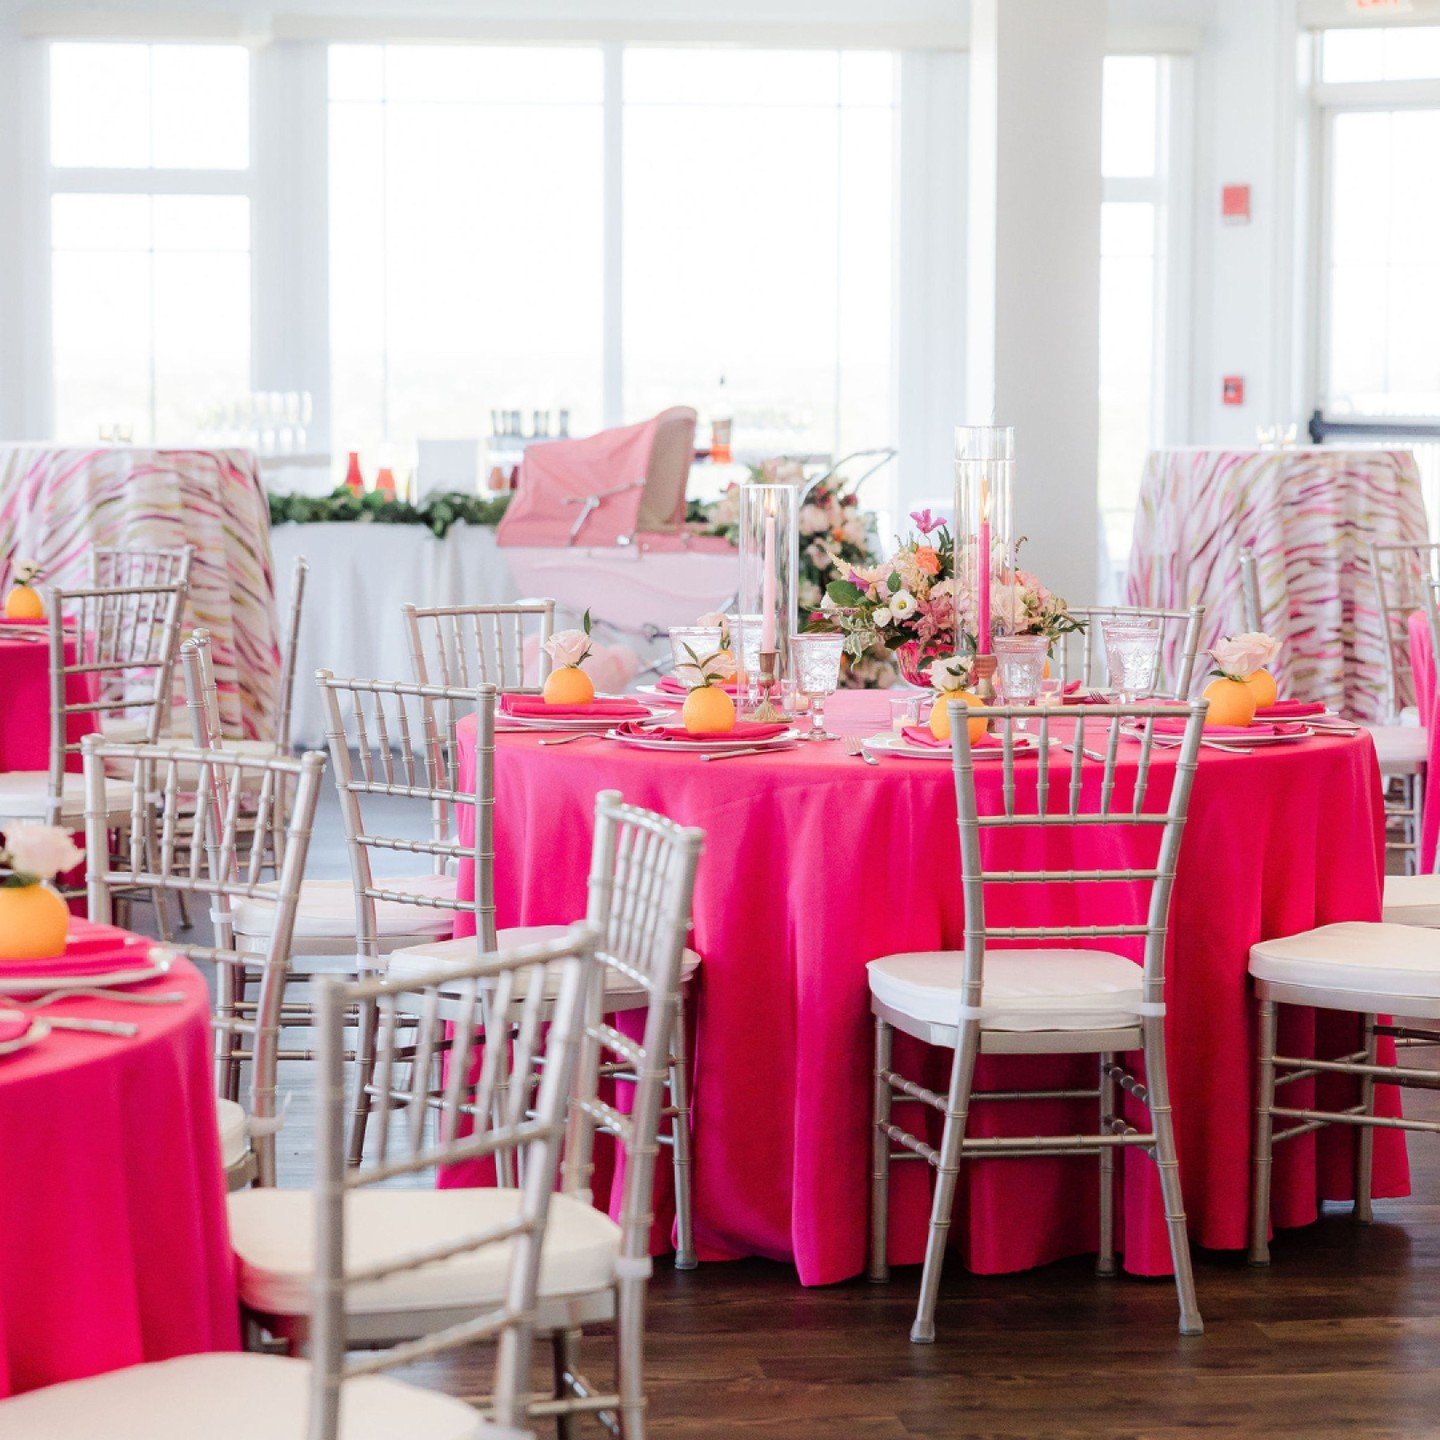 A chic room adorned with a variety of bold and interesting details set the scene for B's vibrant baby shower.

The mix of soft blush tones, bright fuchsias, cheerful oranges, and various contrasting linens created a unexpected, yet inviting atmospher